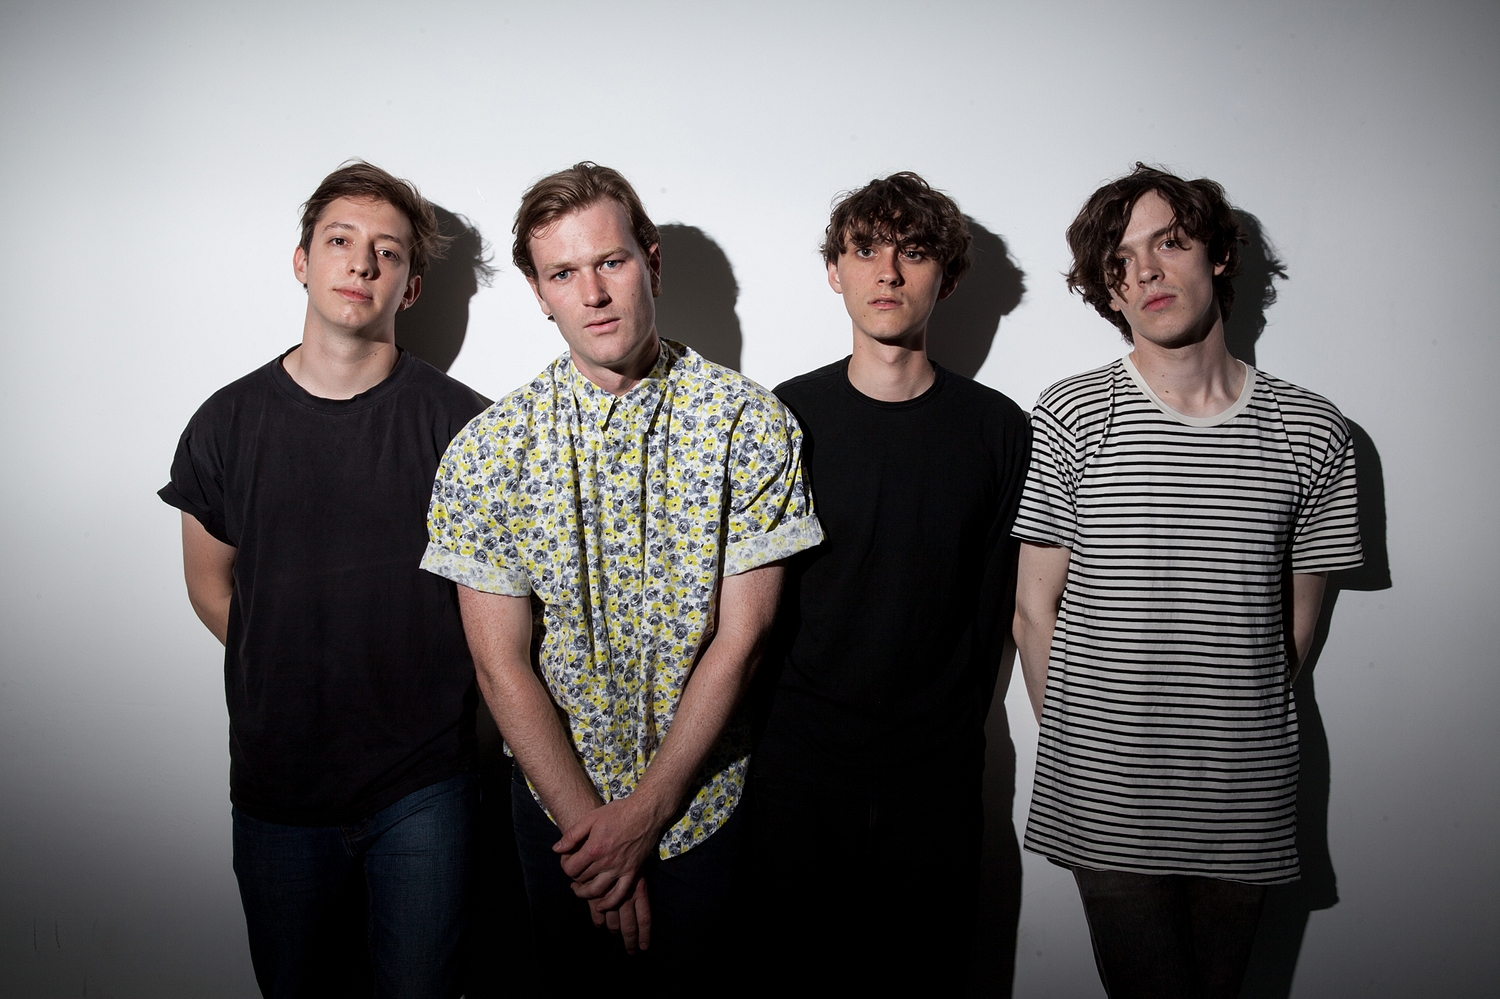 Gengahr: "It’s slowly building up to something"